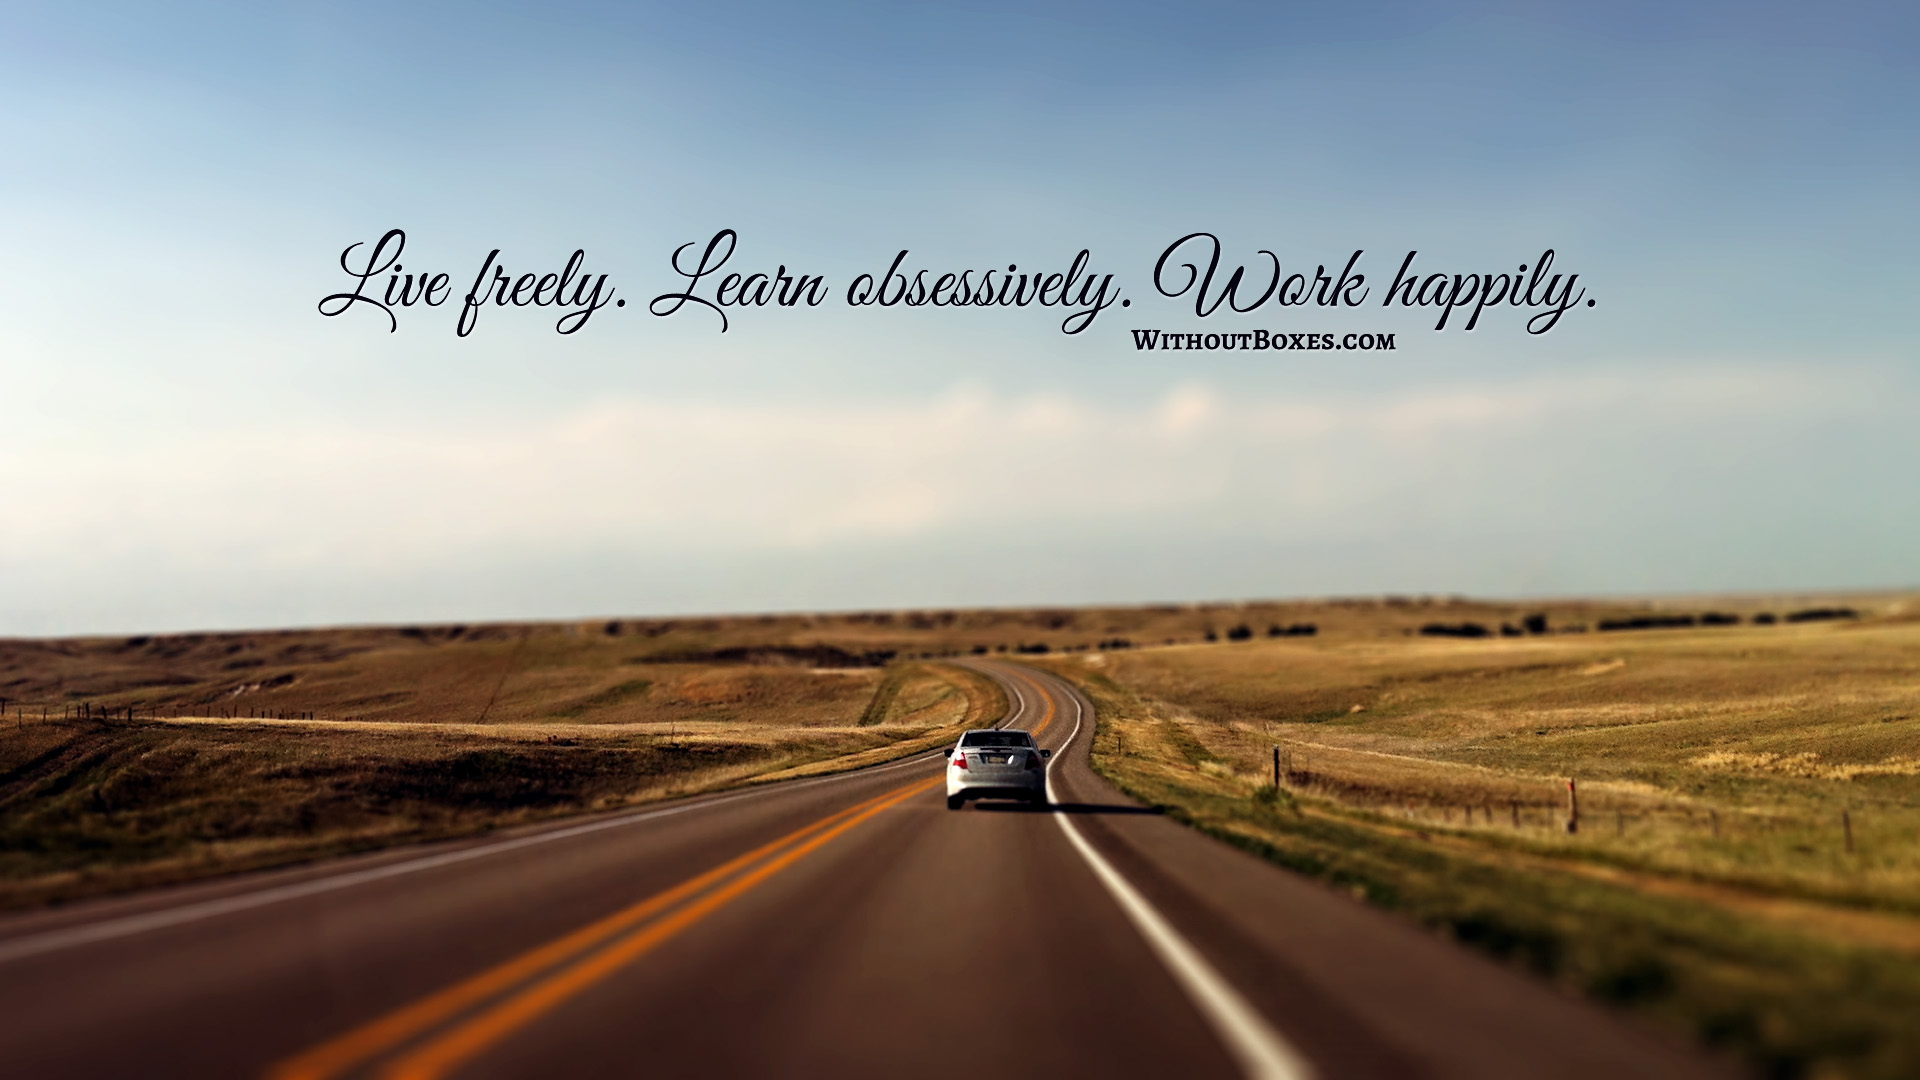 Inspirational Wallpaper The Open Road Without Boxes